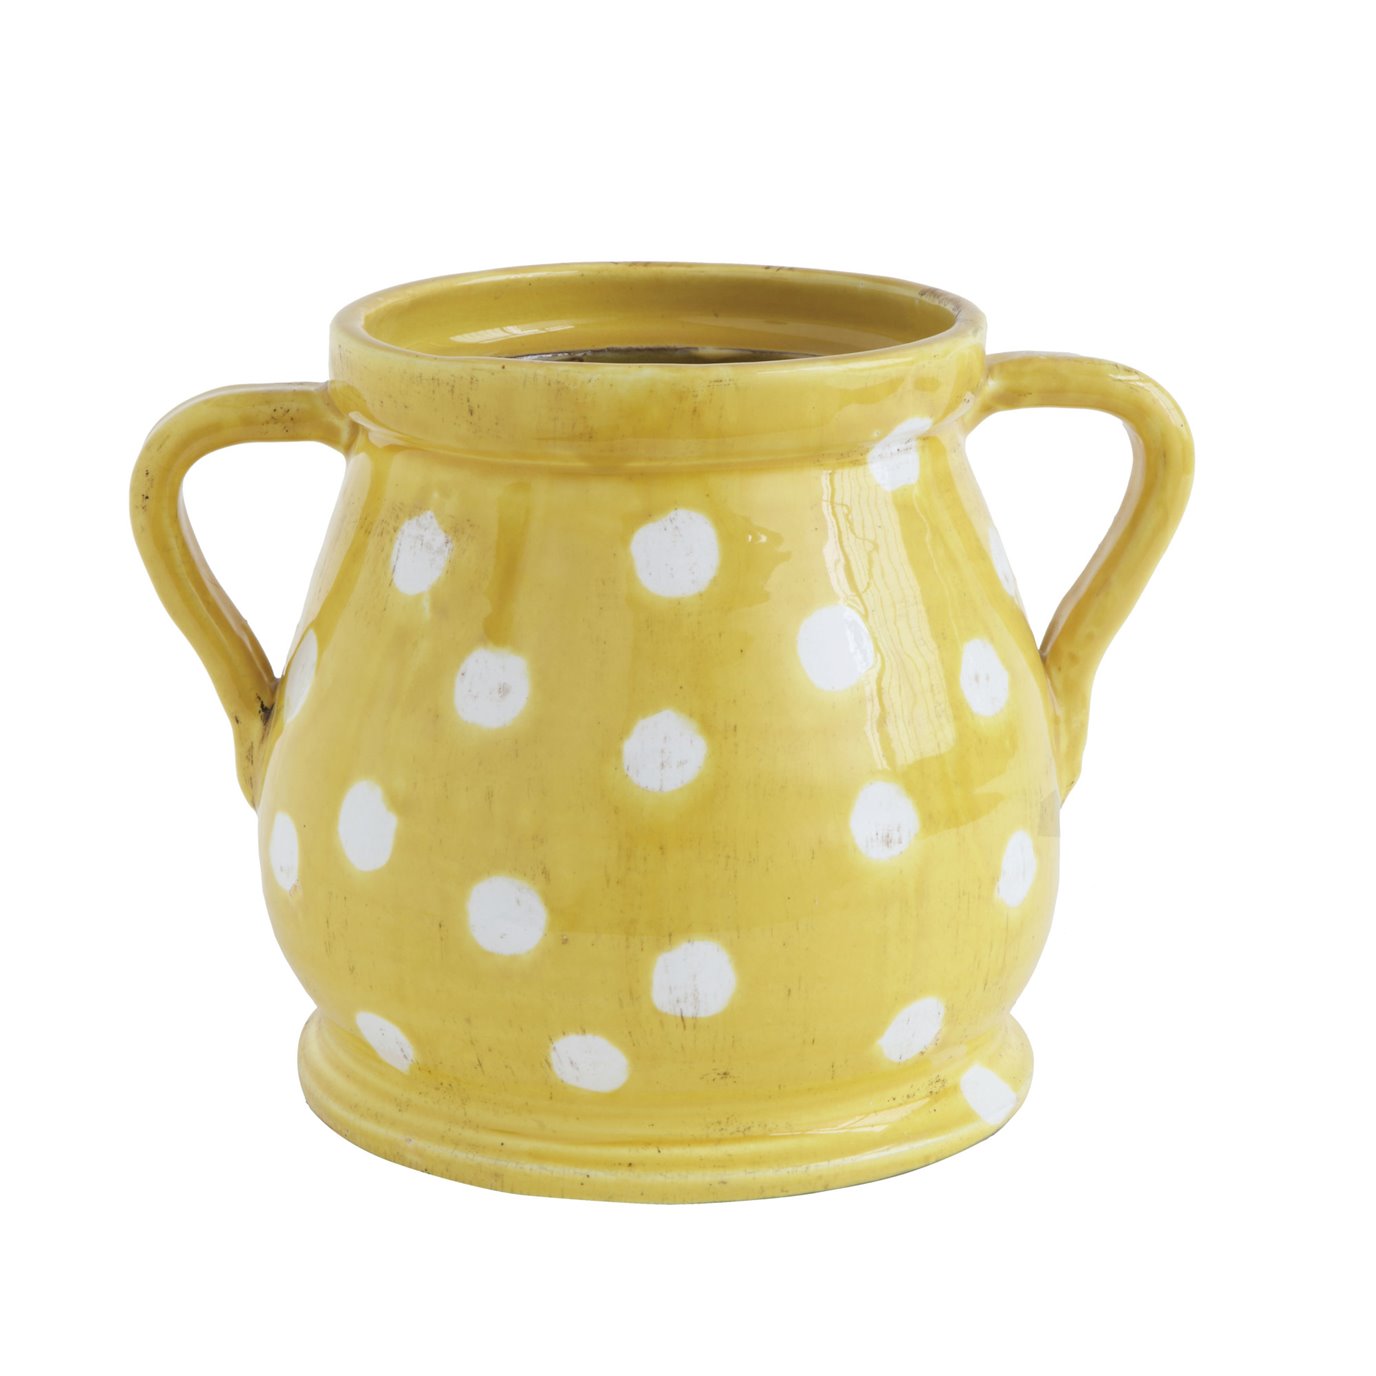 Yellow Decorative Terracotta Planter with White Dots and Handles